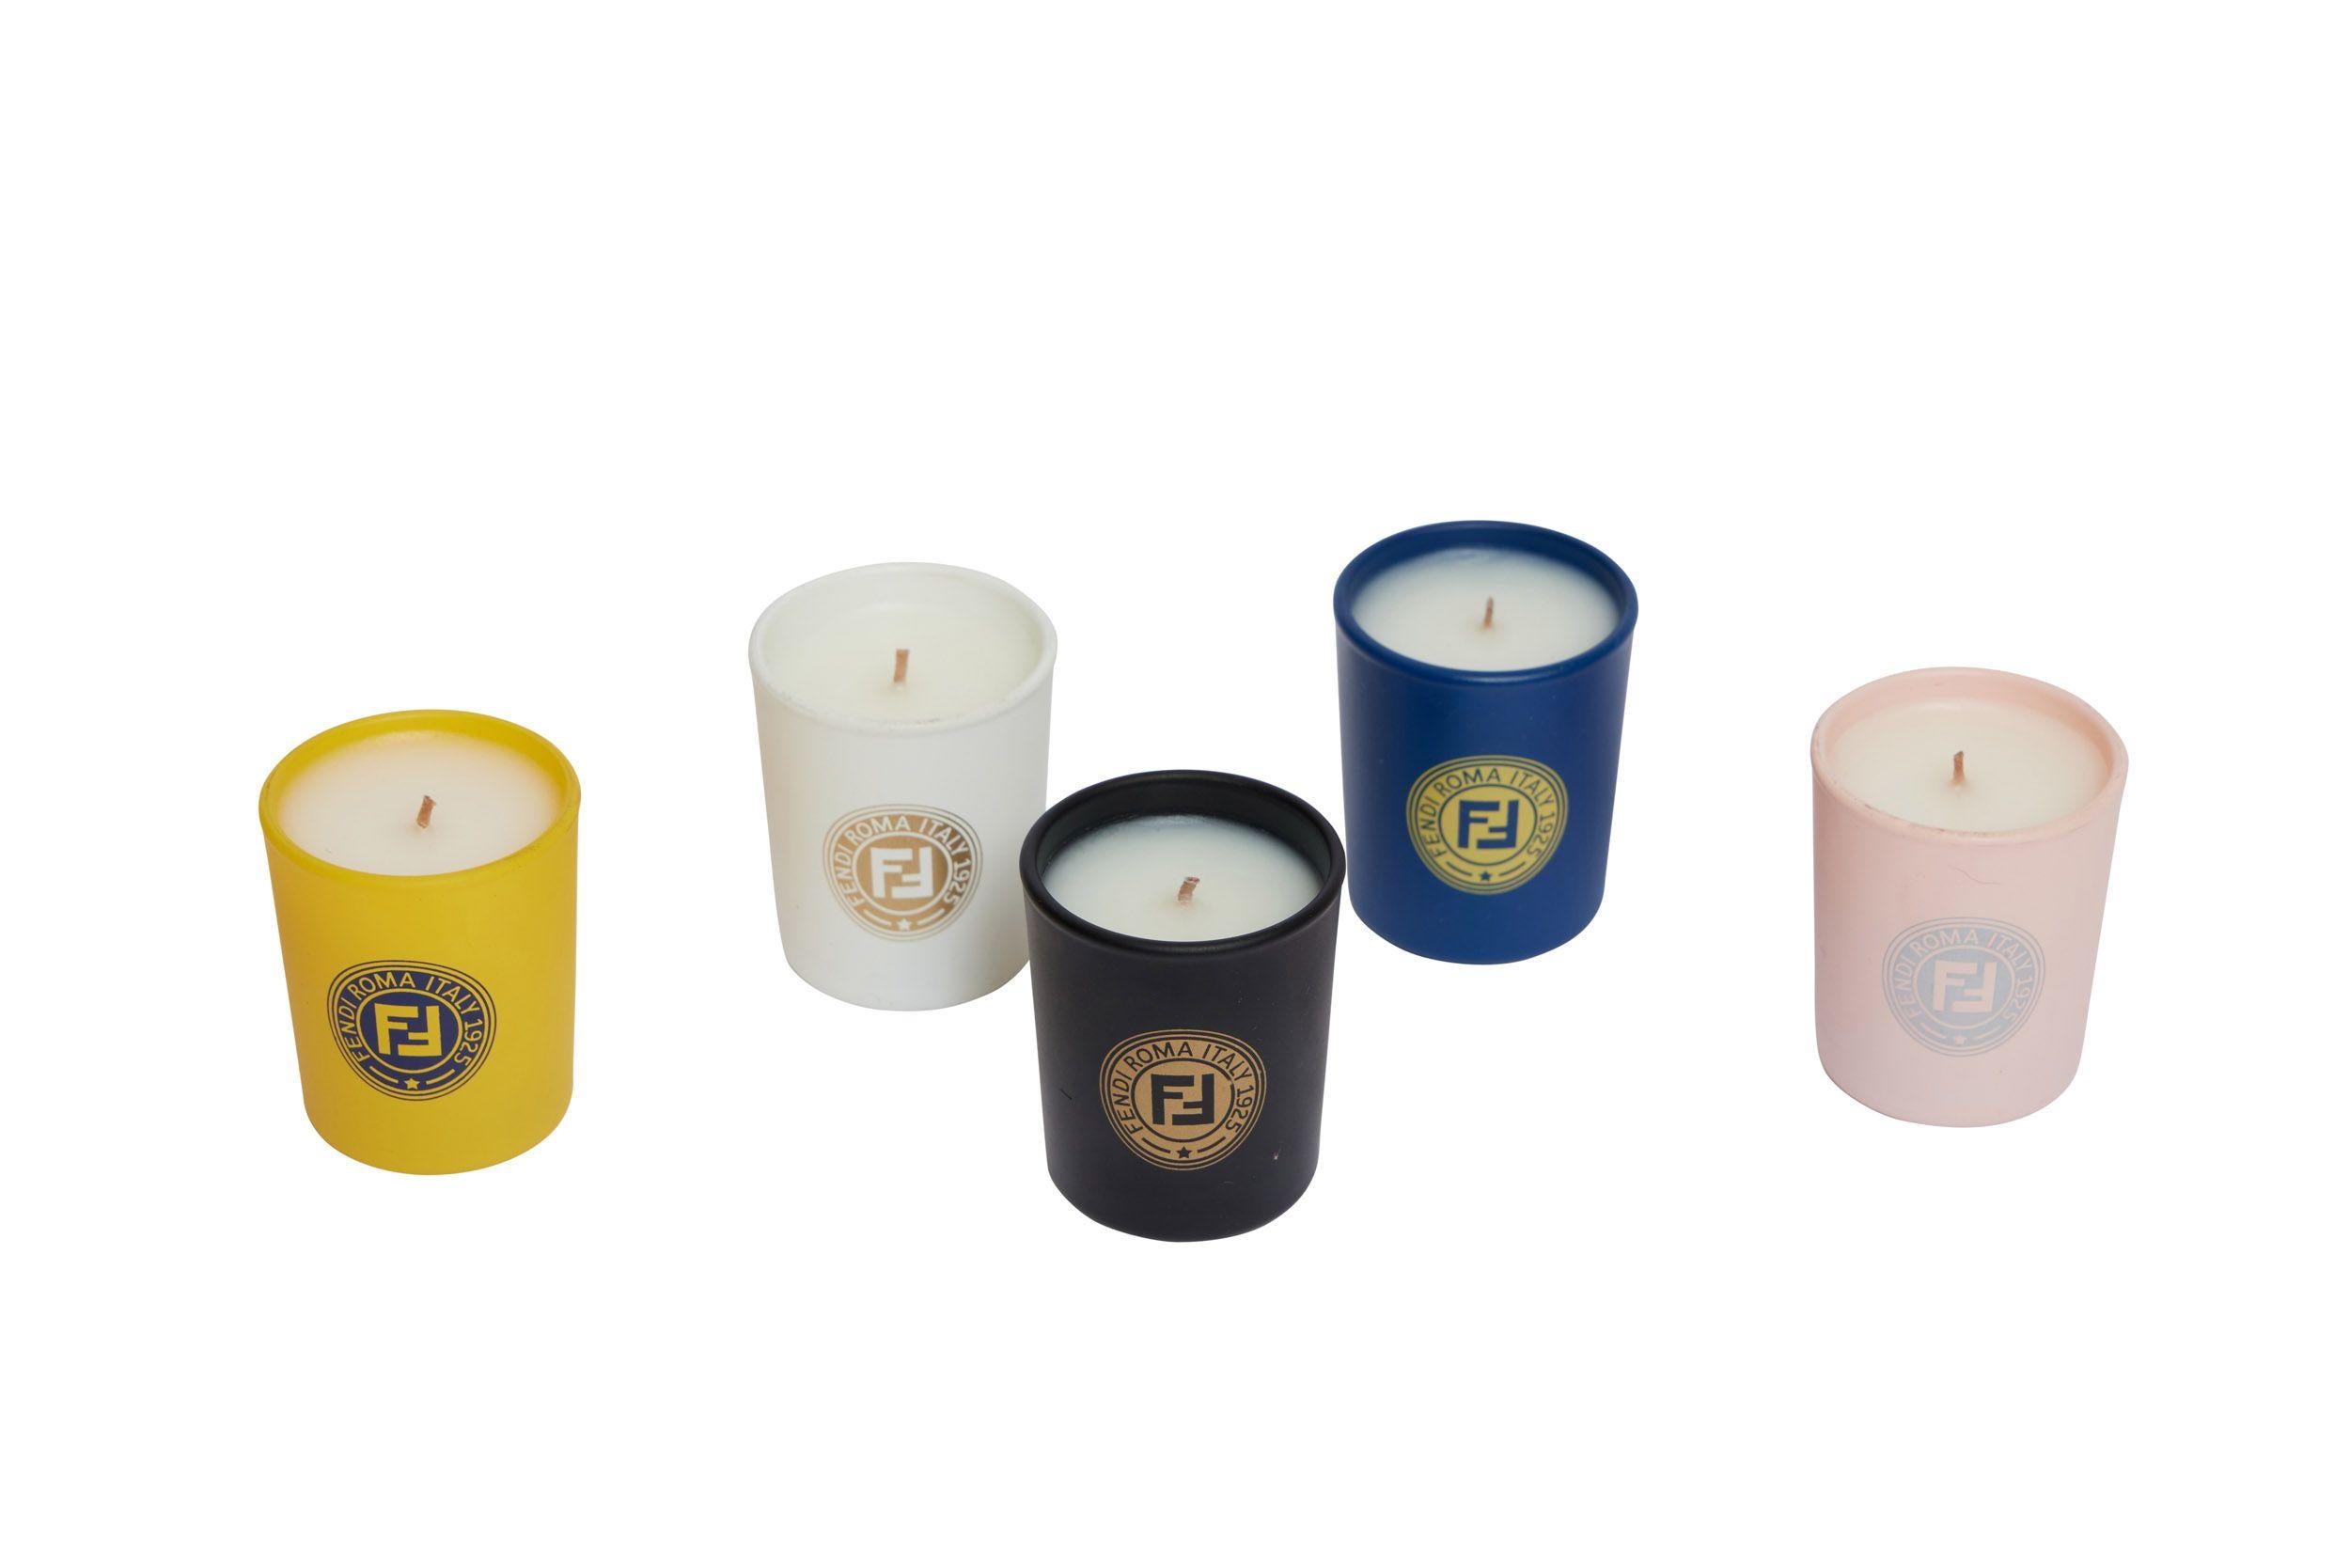 Fendi Logo Scented Candles (set of 5) with multicolor ceramic jars. The dimensions of each candle are: H 2.20